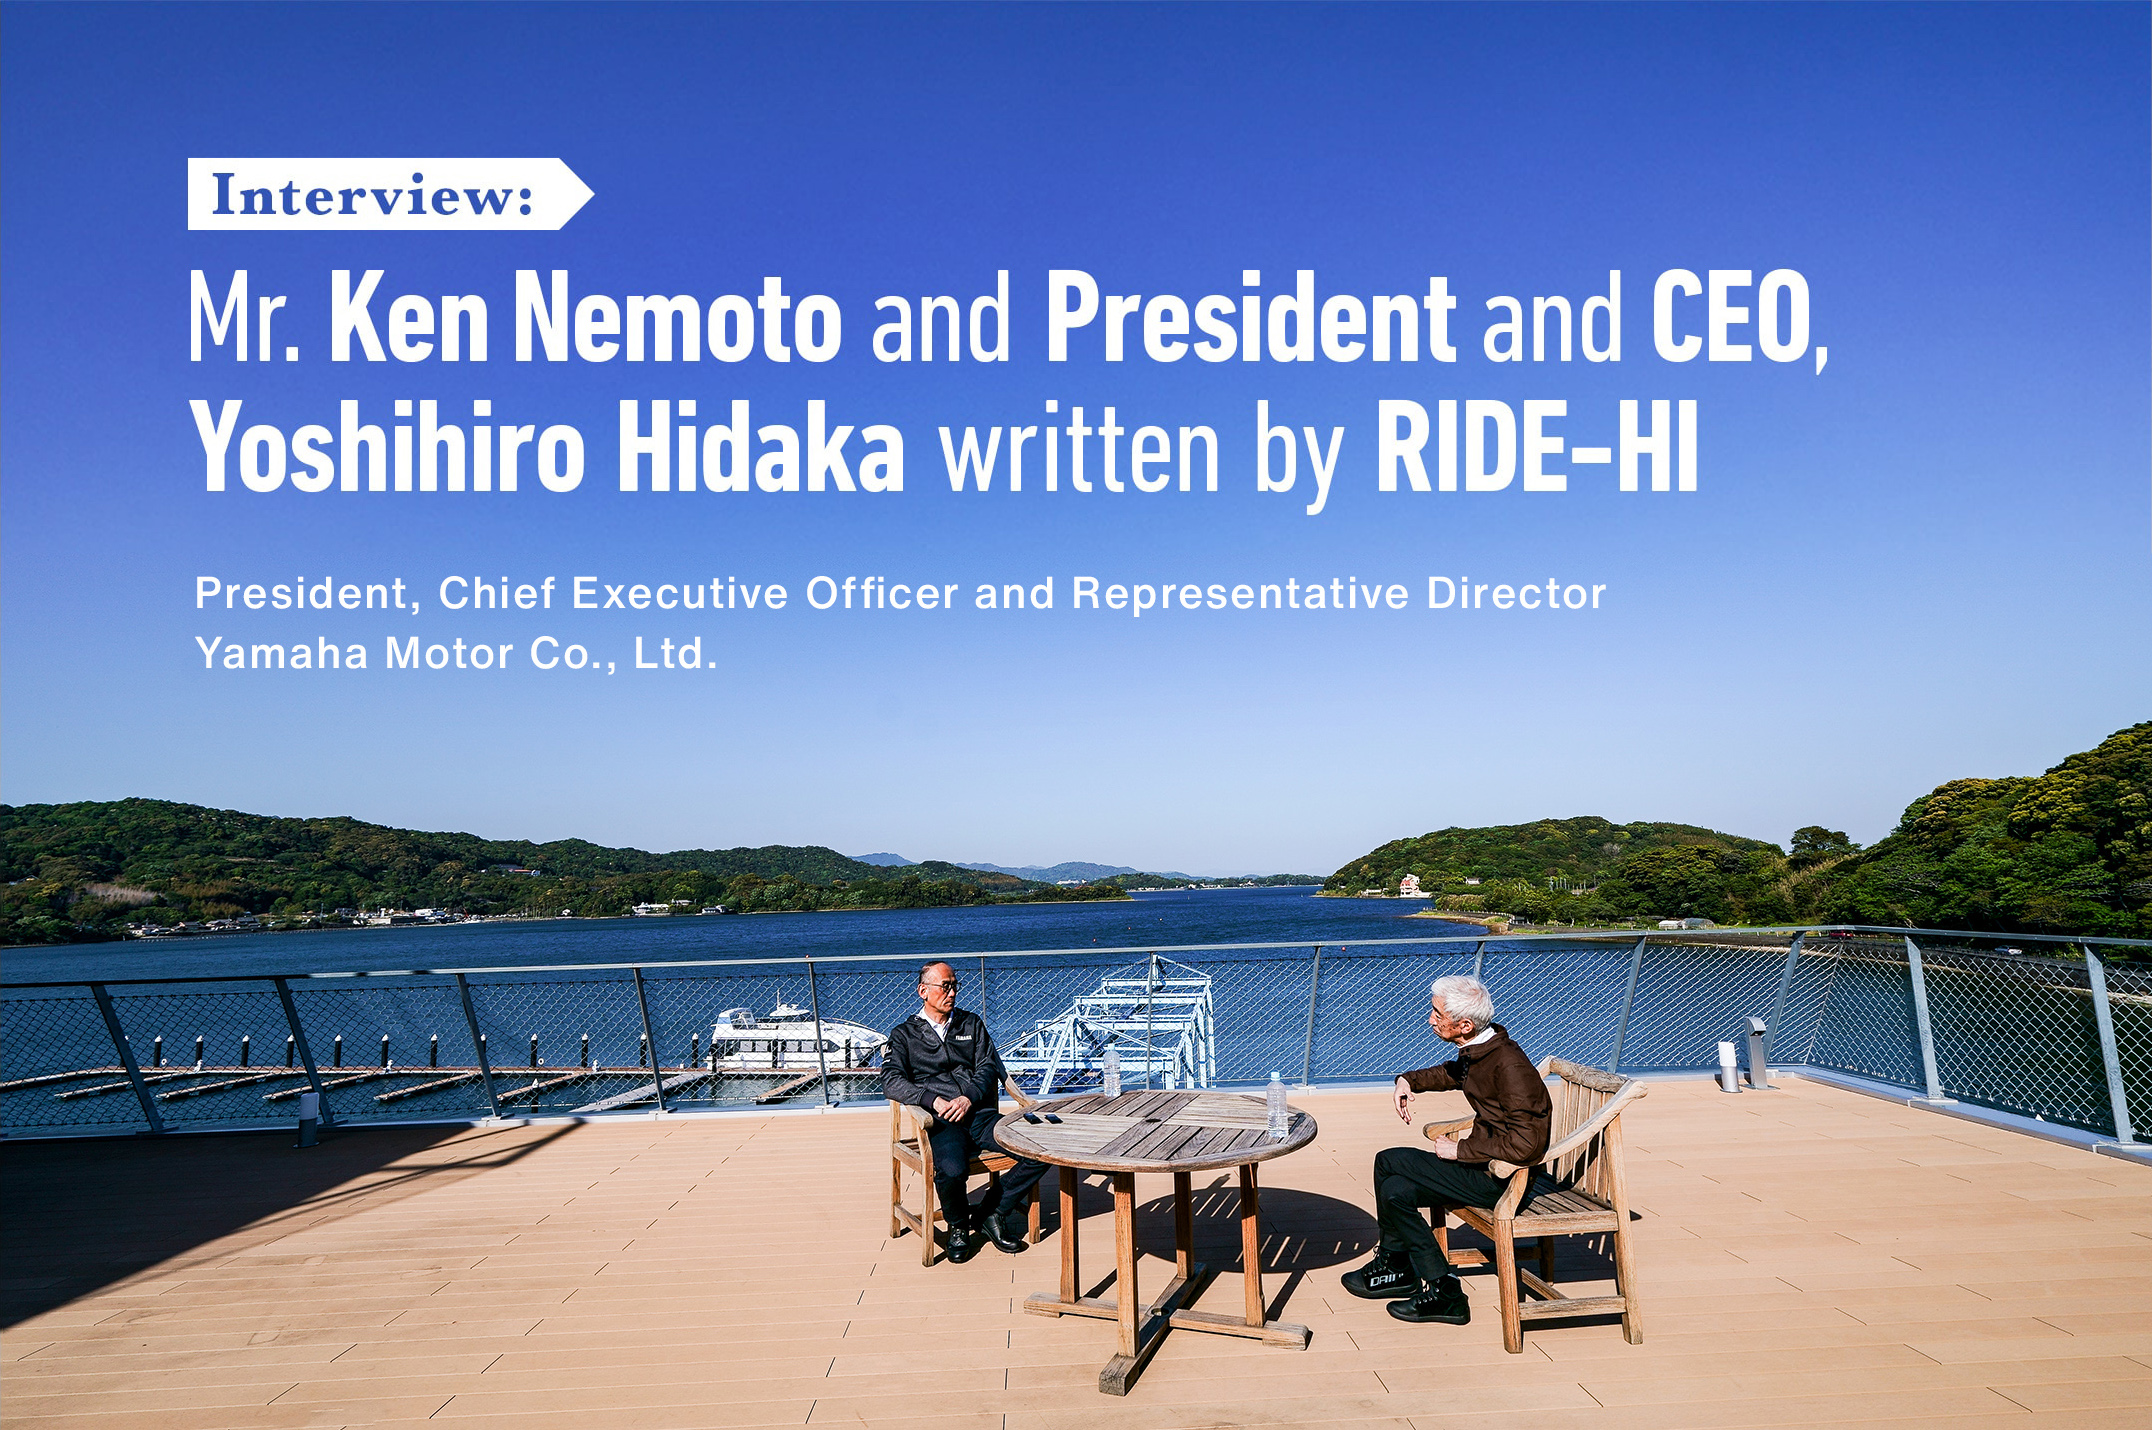 Interview: Mr. Ken Nemoto and President and CEO, Yoshihiro Hidaka - Interview with Yoshihiro Hidaka.